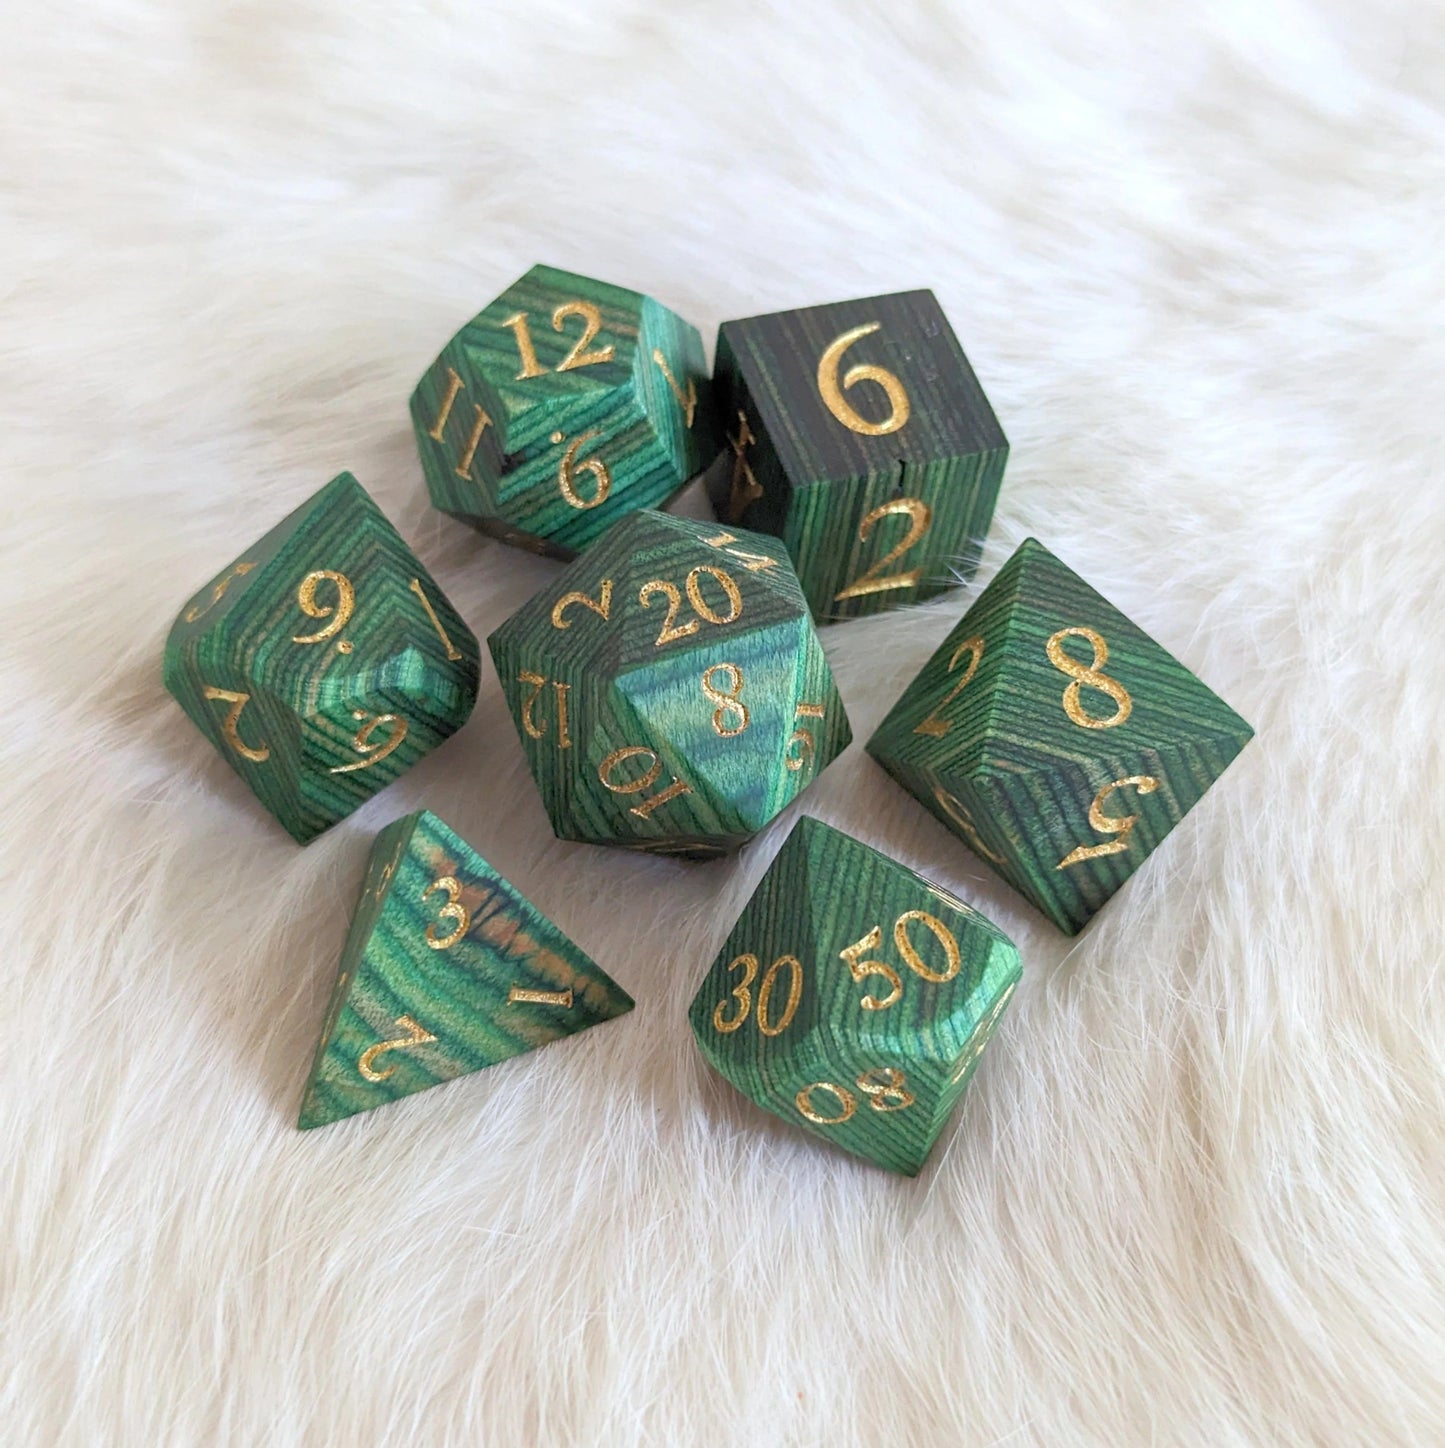 Emerald Green Stripe Wood Dice Set - 7 piece sharp-edge real wood dice set - The Fourth Place